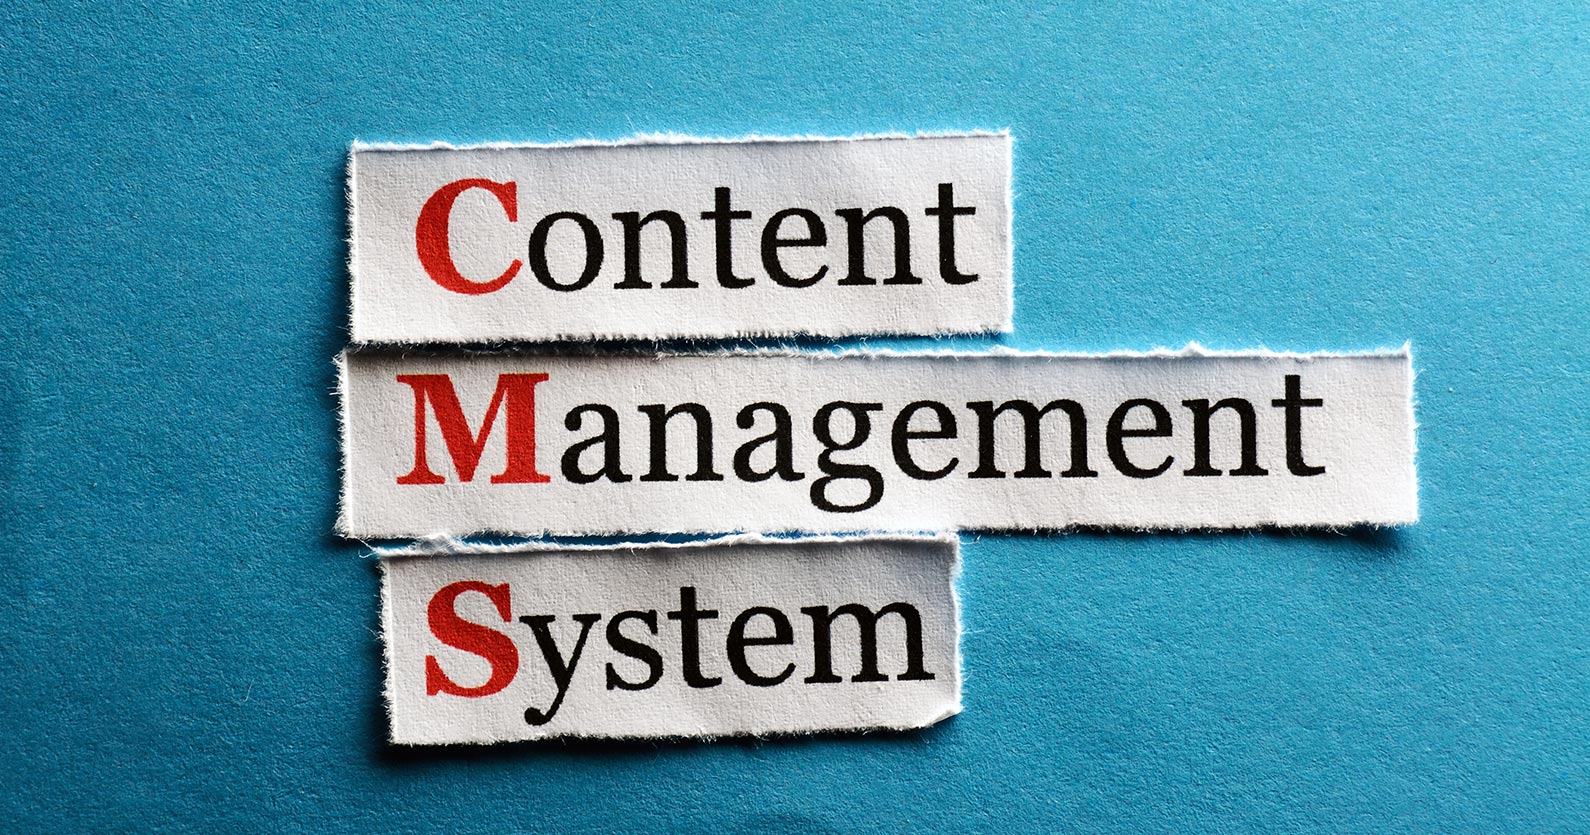 Image showing the words Content Management System on a blue background